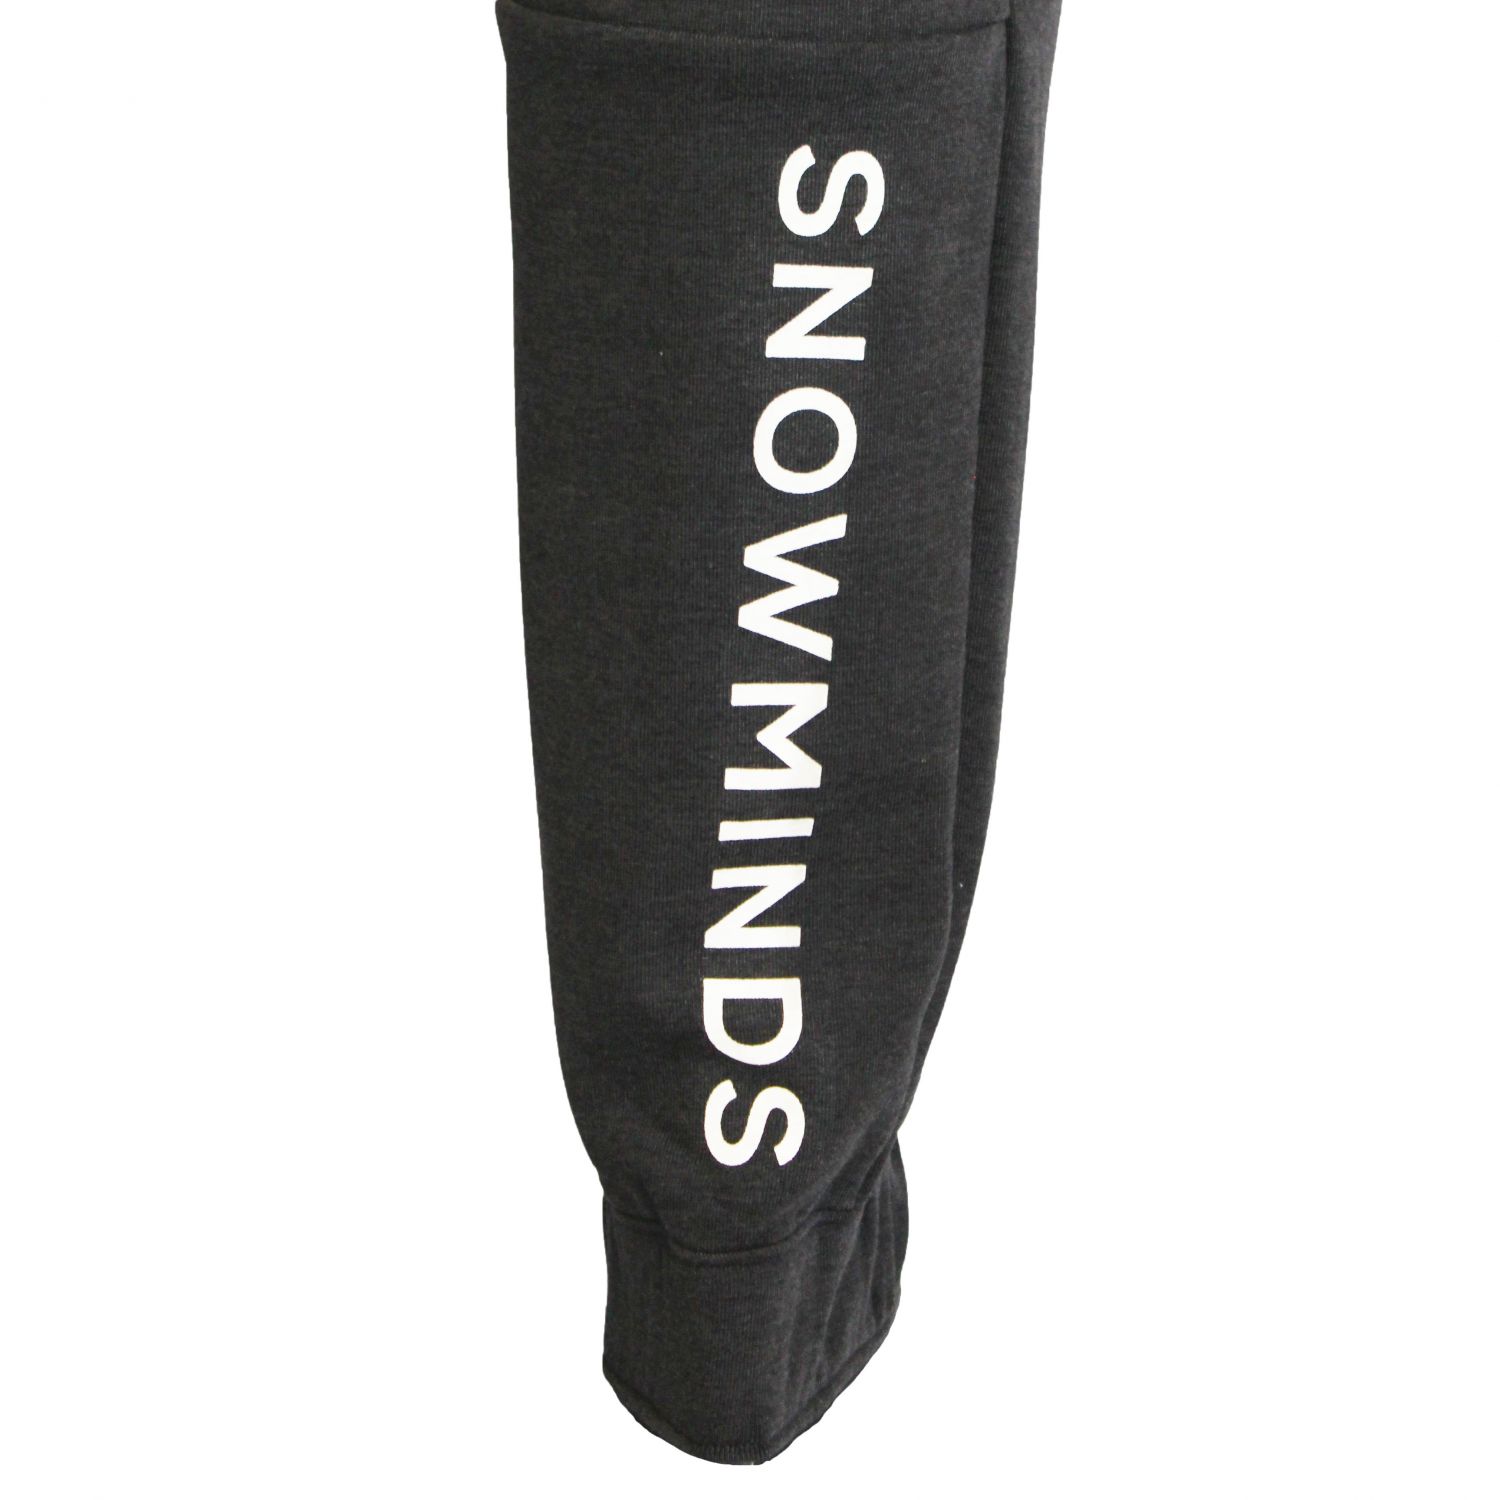 The Snowminds Chill SlowMo Pants